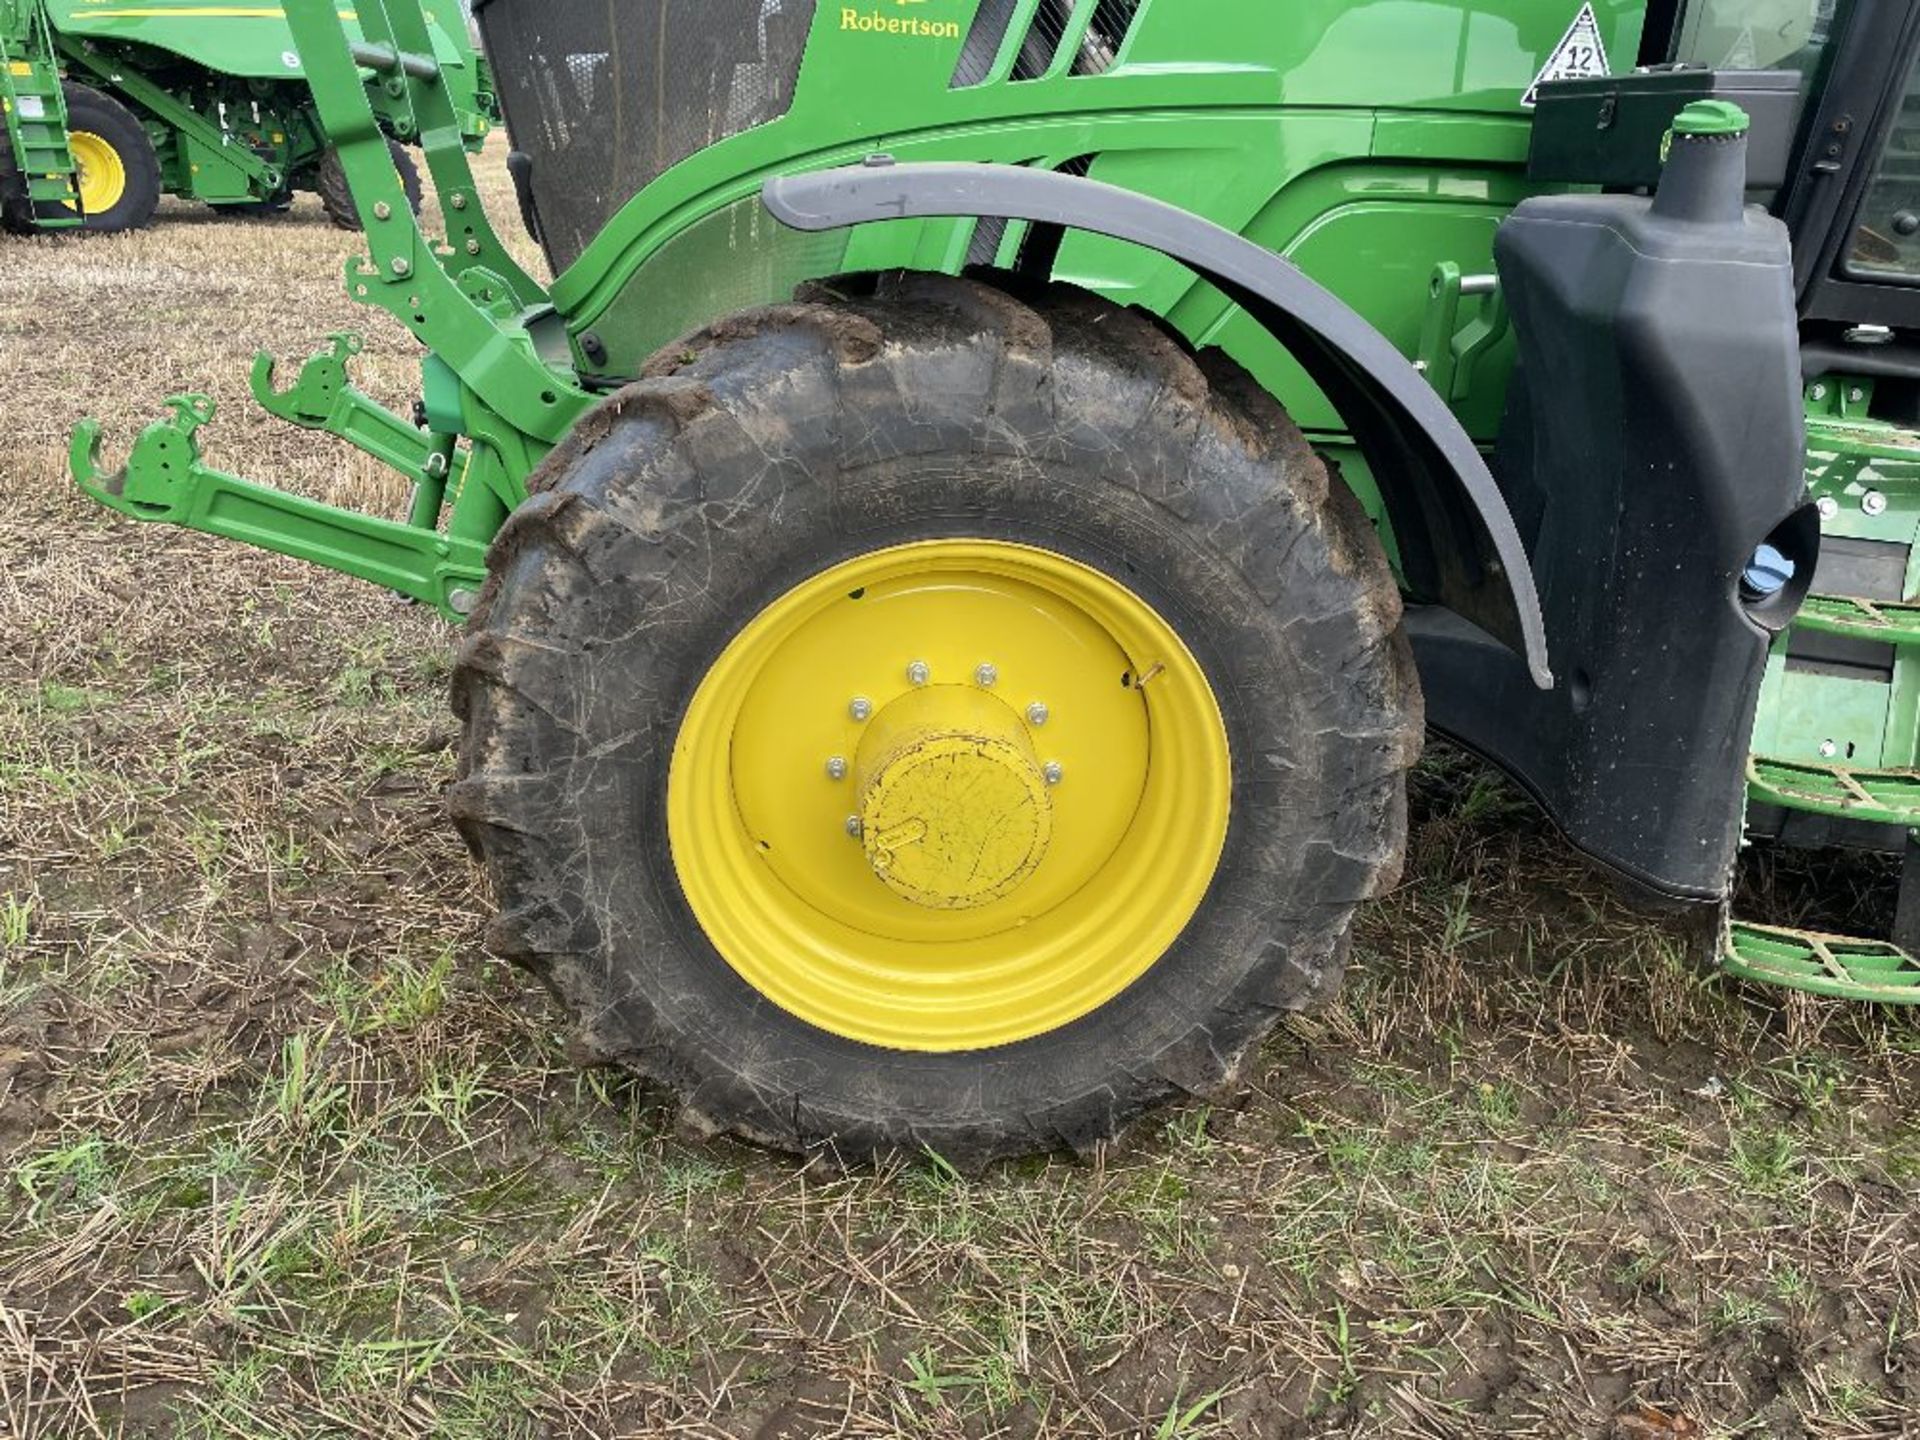 2018 John Deere 6195R 4wd Tractor (Ultimate Edition), approx. 1848 hours, Reg No. - Image 11 of 19